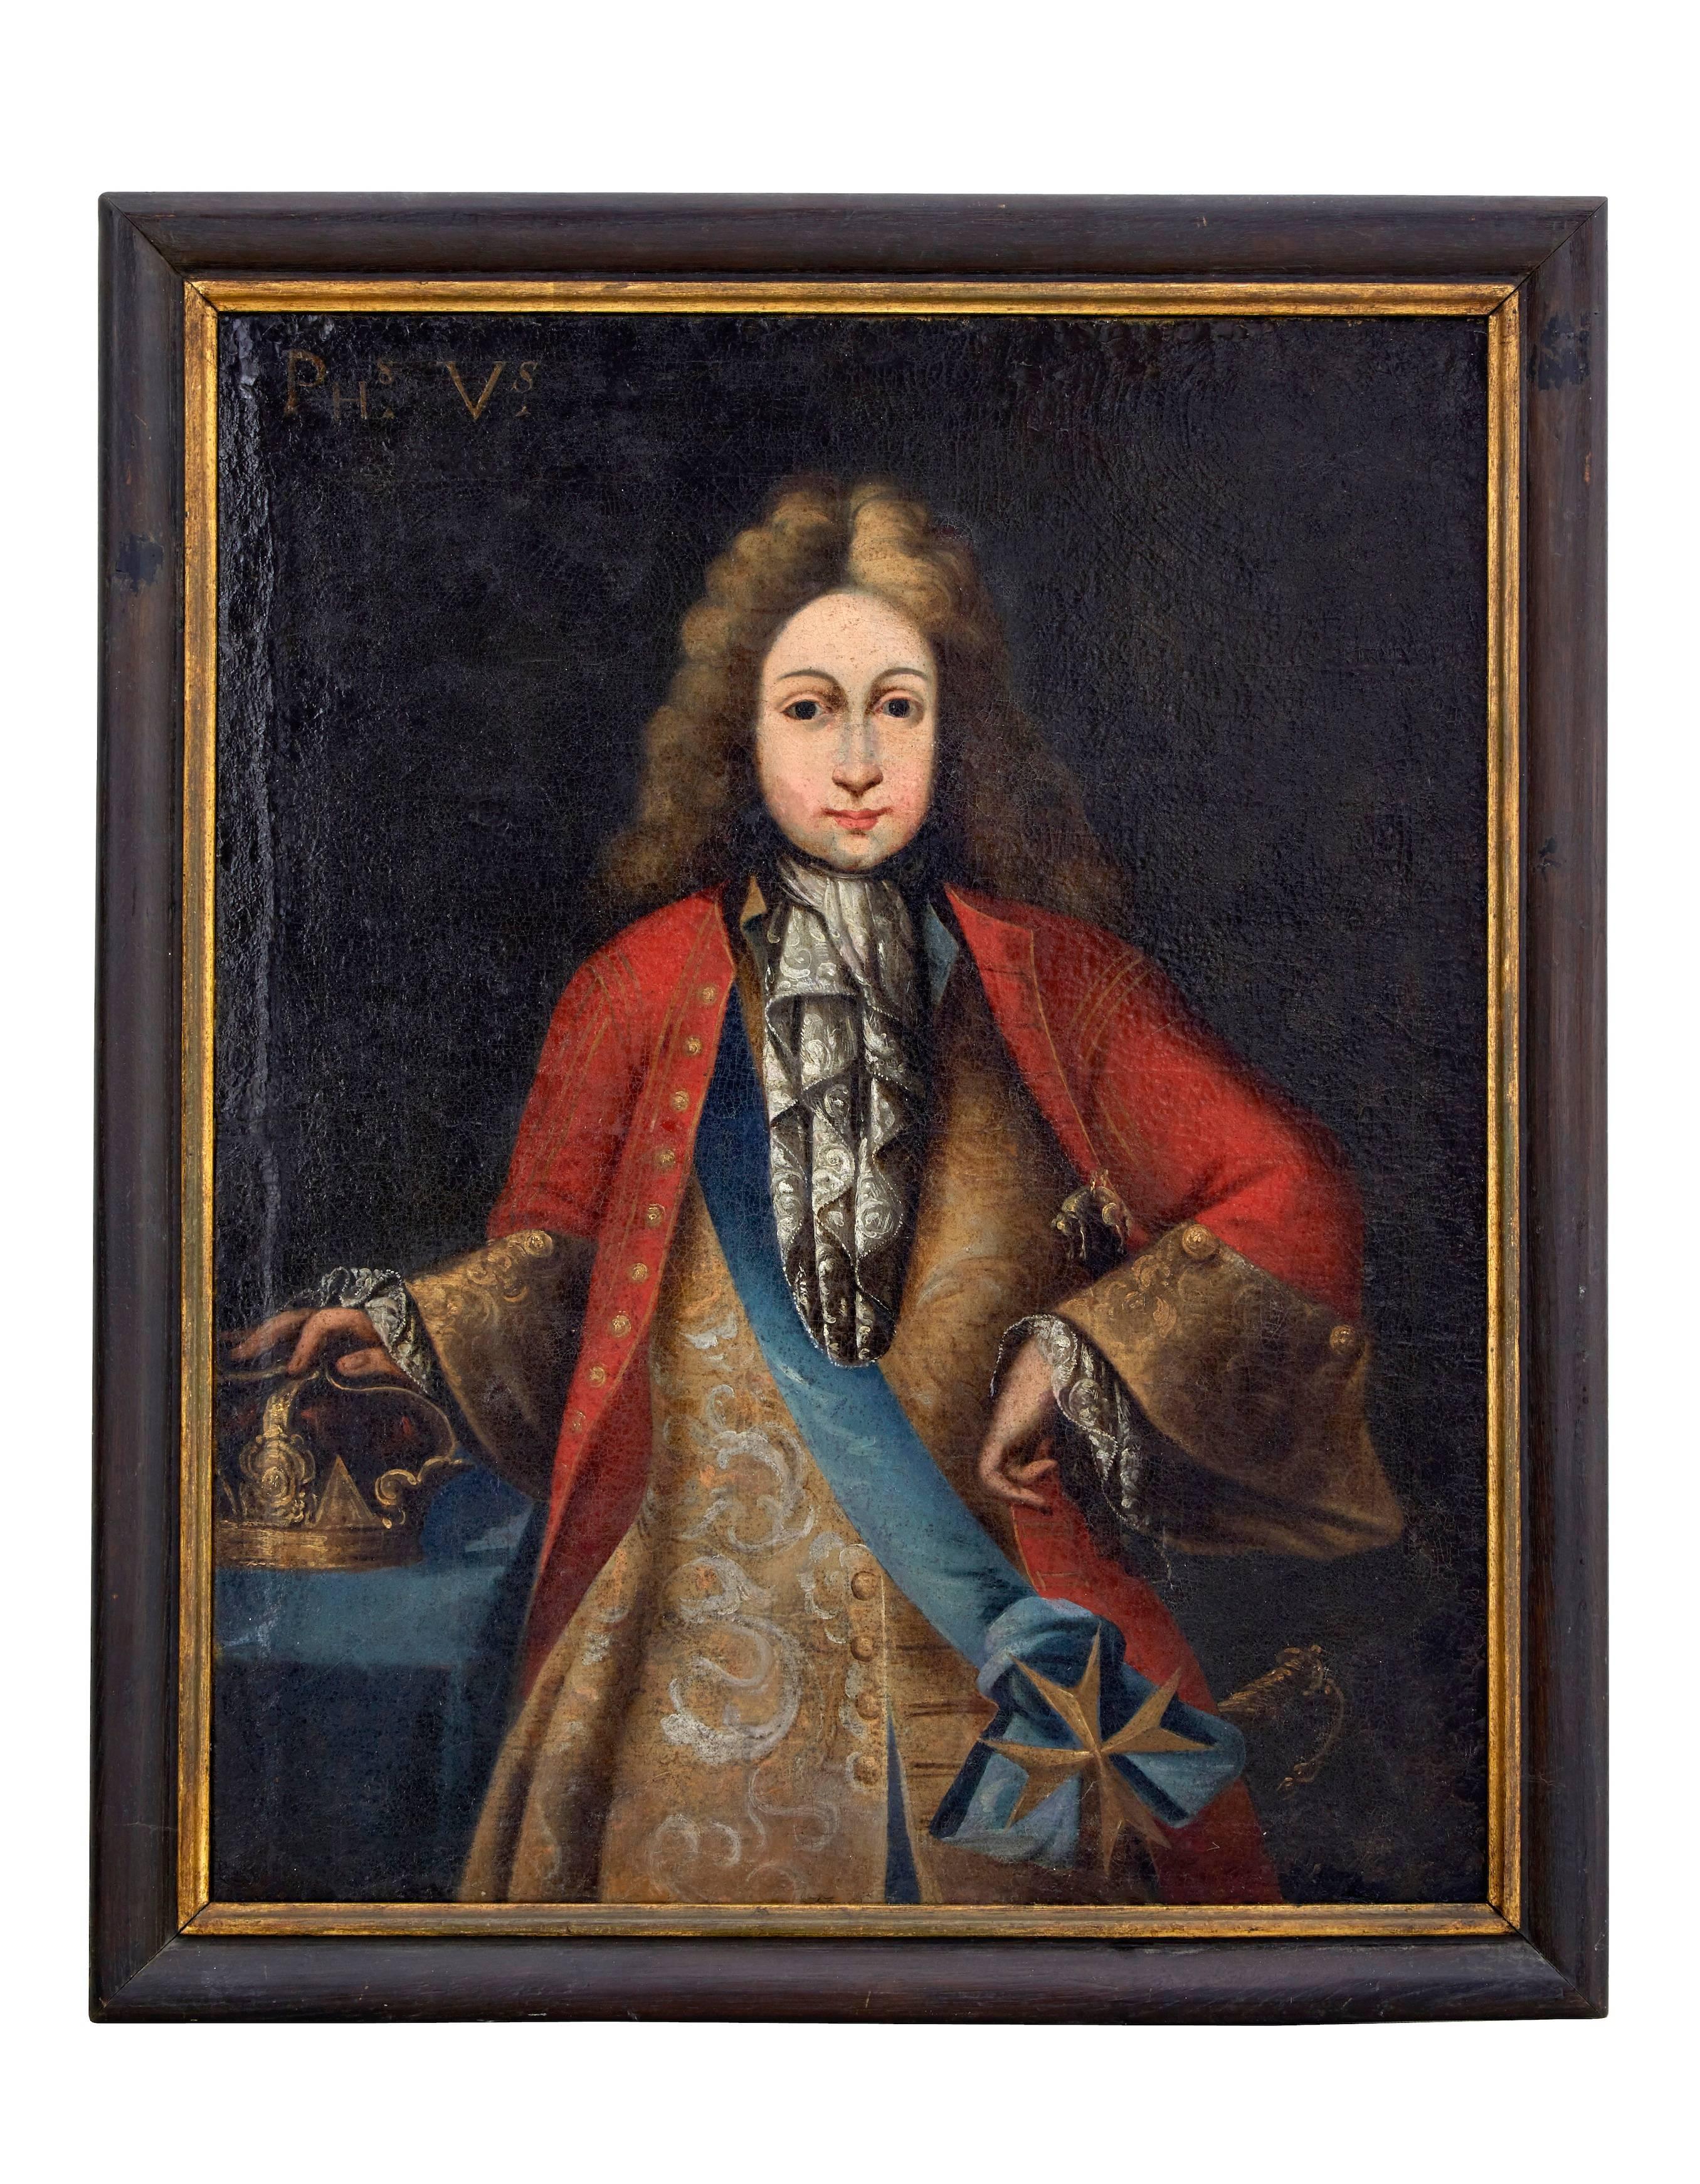 Pair of early 18th century imperial Habsburg portraits, circa 1720.
Probably depicting the young Charles VII, holy roman emperor (1697-1745) and maria Amalia of Austria (1701-1756)
Oil on canvas, in original oak frames.

Overall height: 42